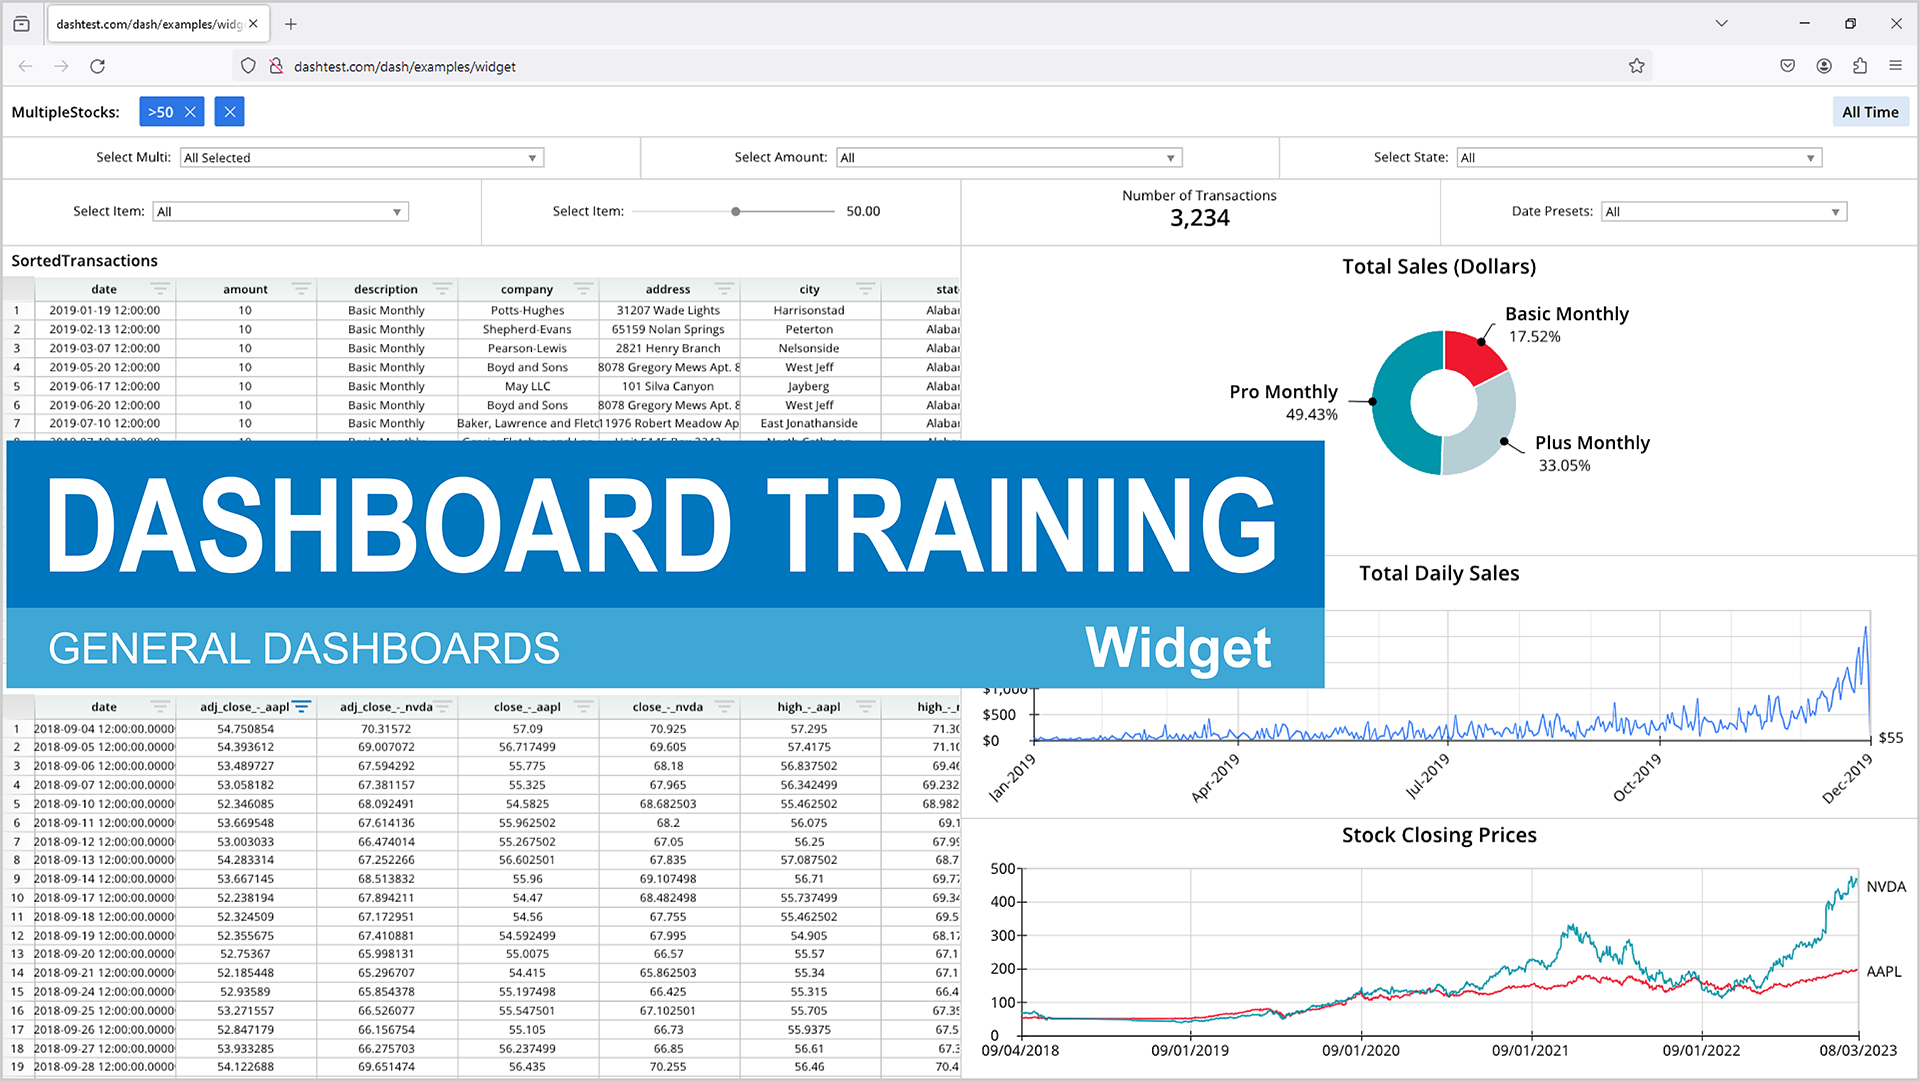 A screenshot of a dashboard training wizard, displaying various graphs and charts.